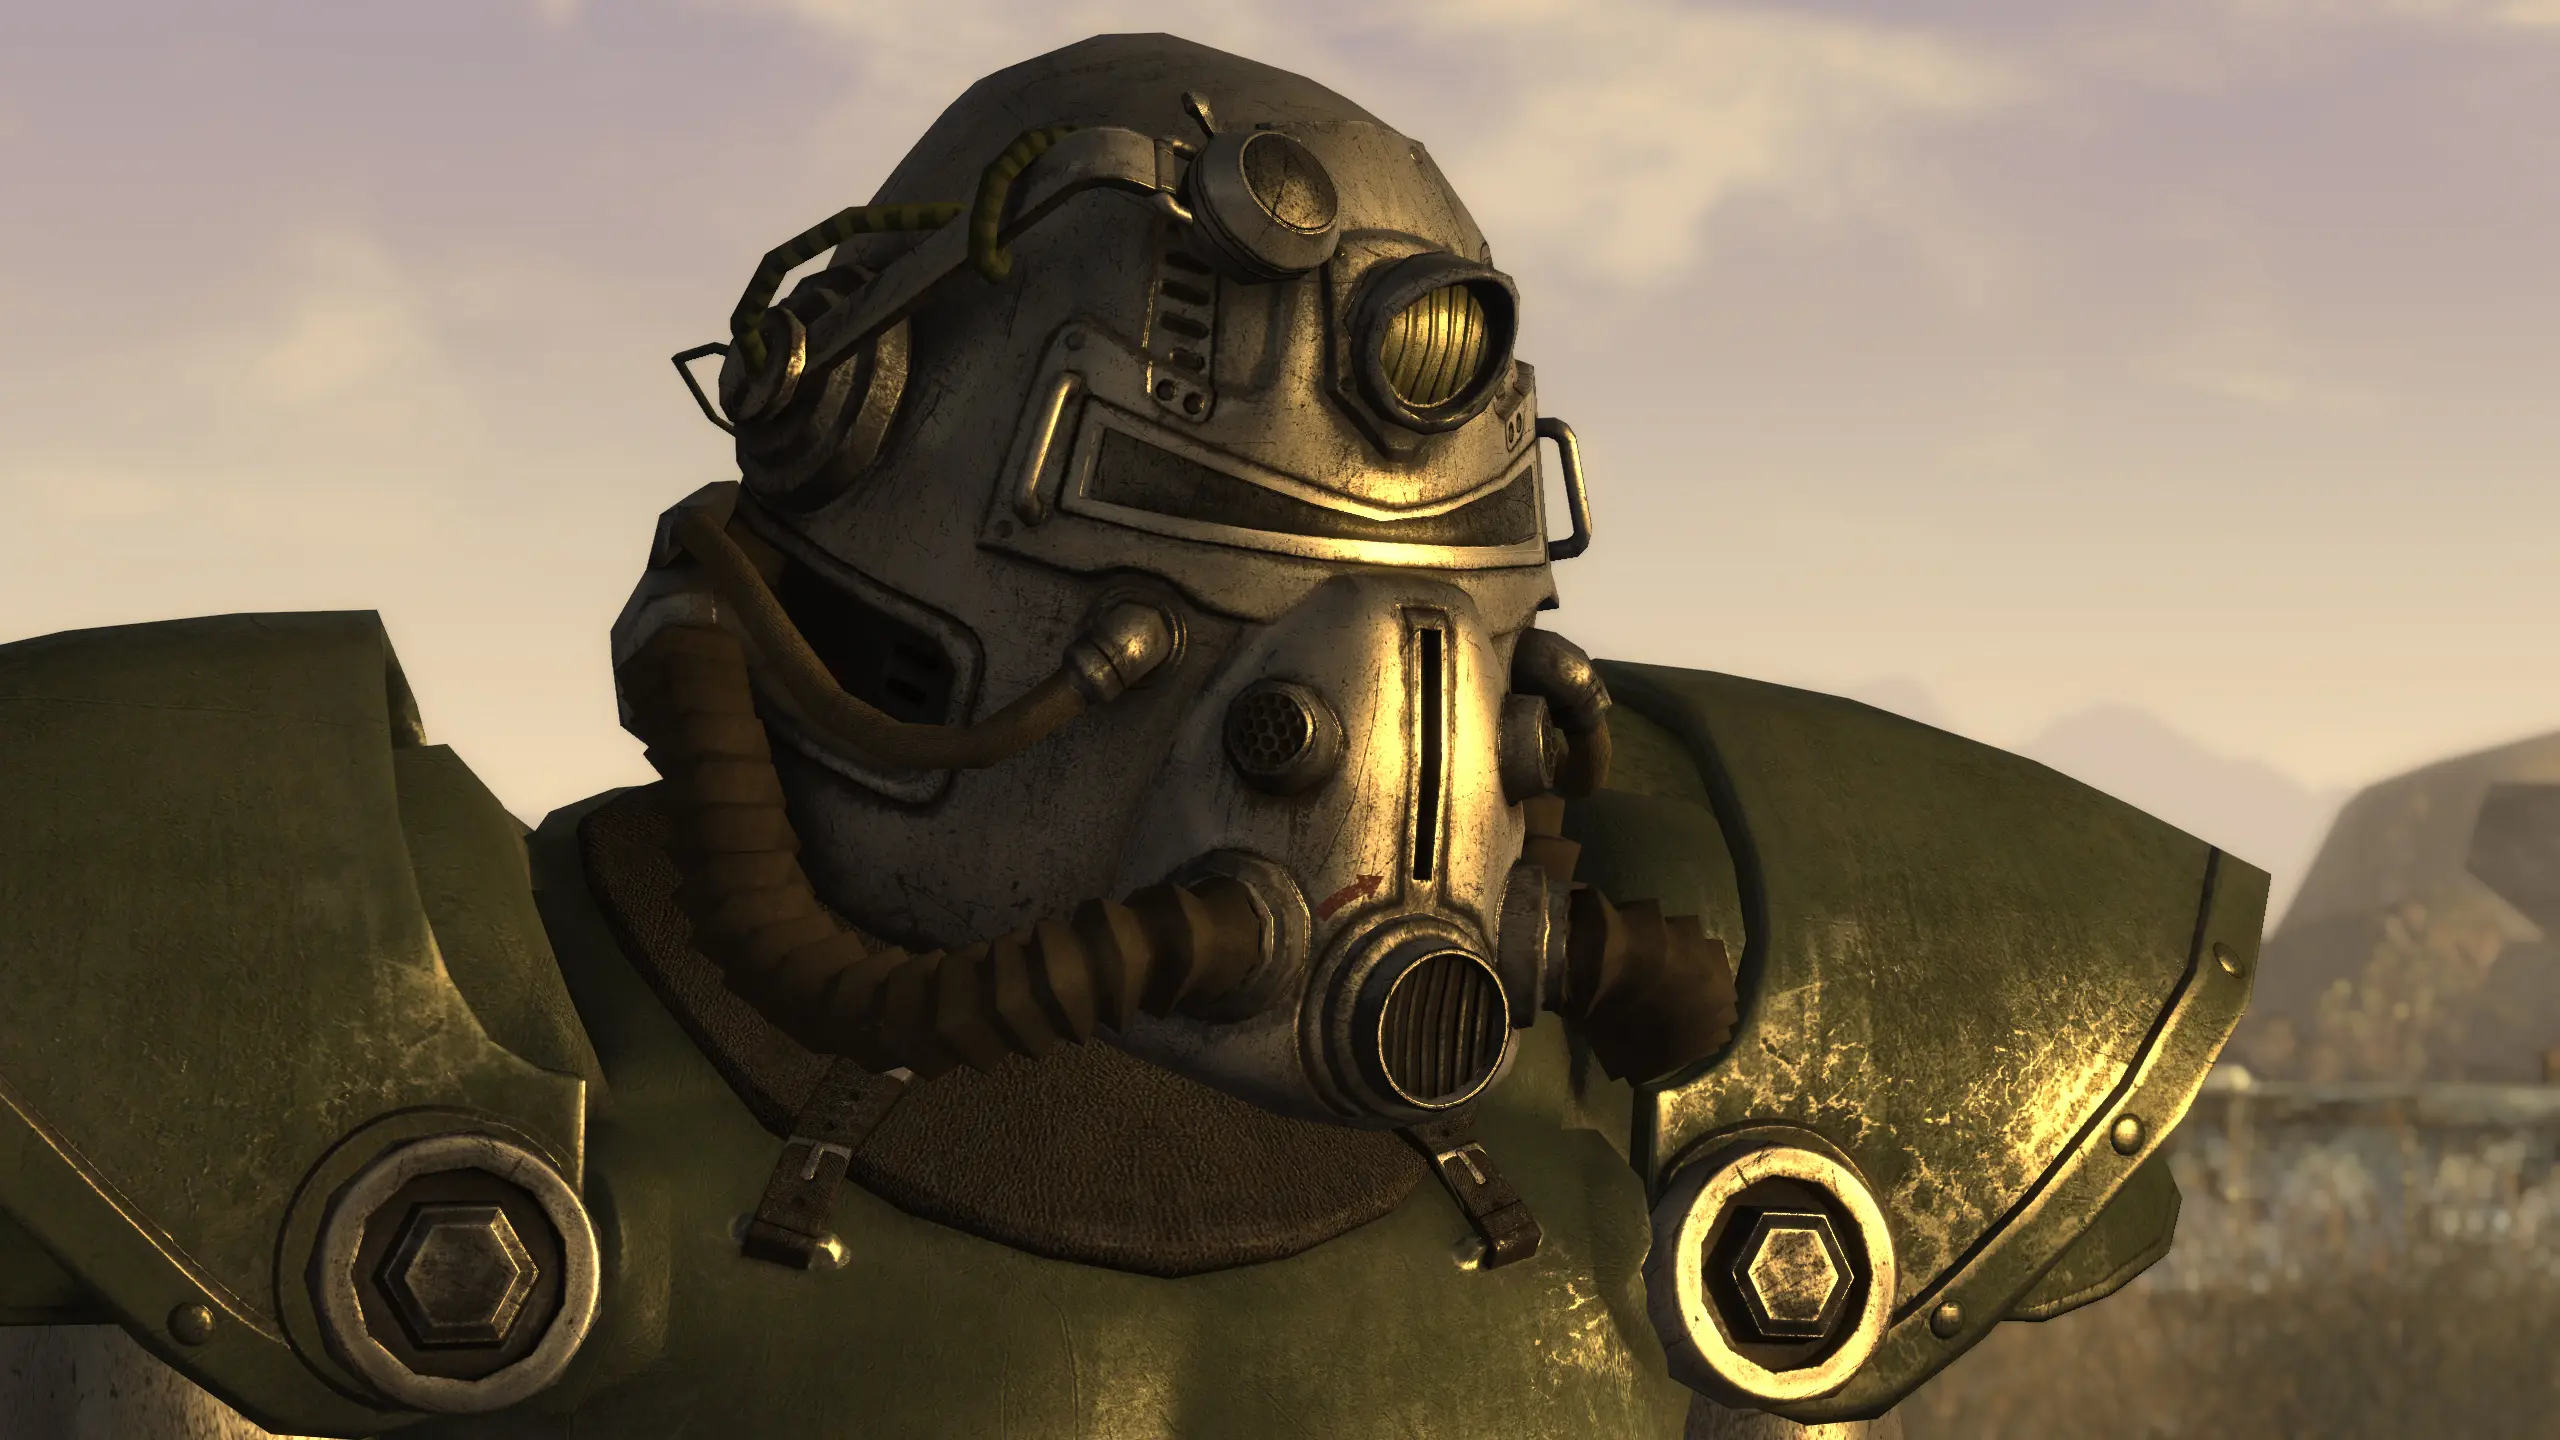 T 51b Full Retexture At Fallout New Vegas Mods And Community 3539